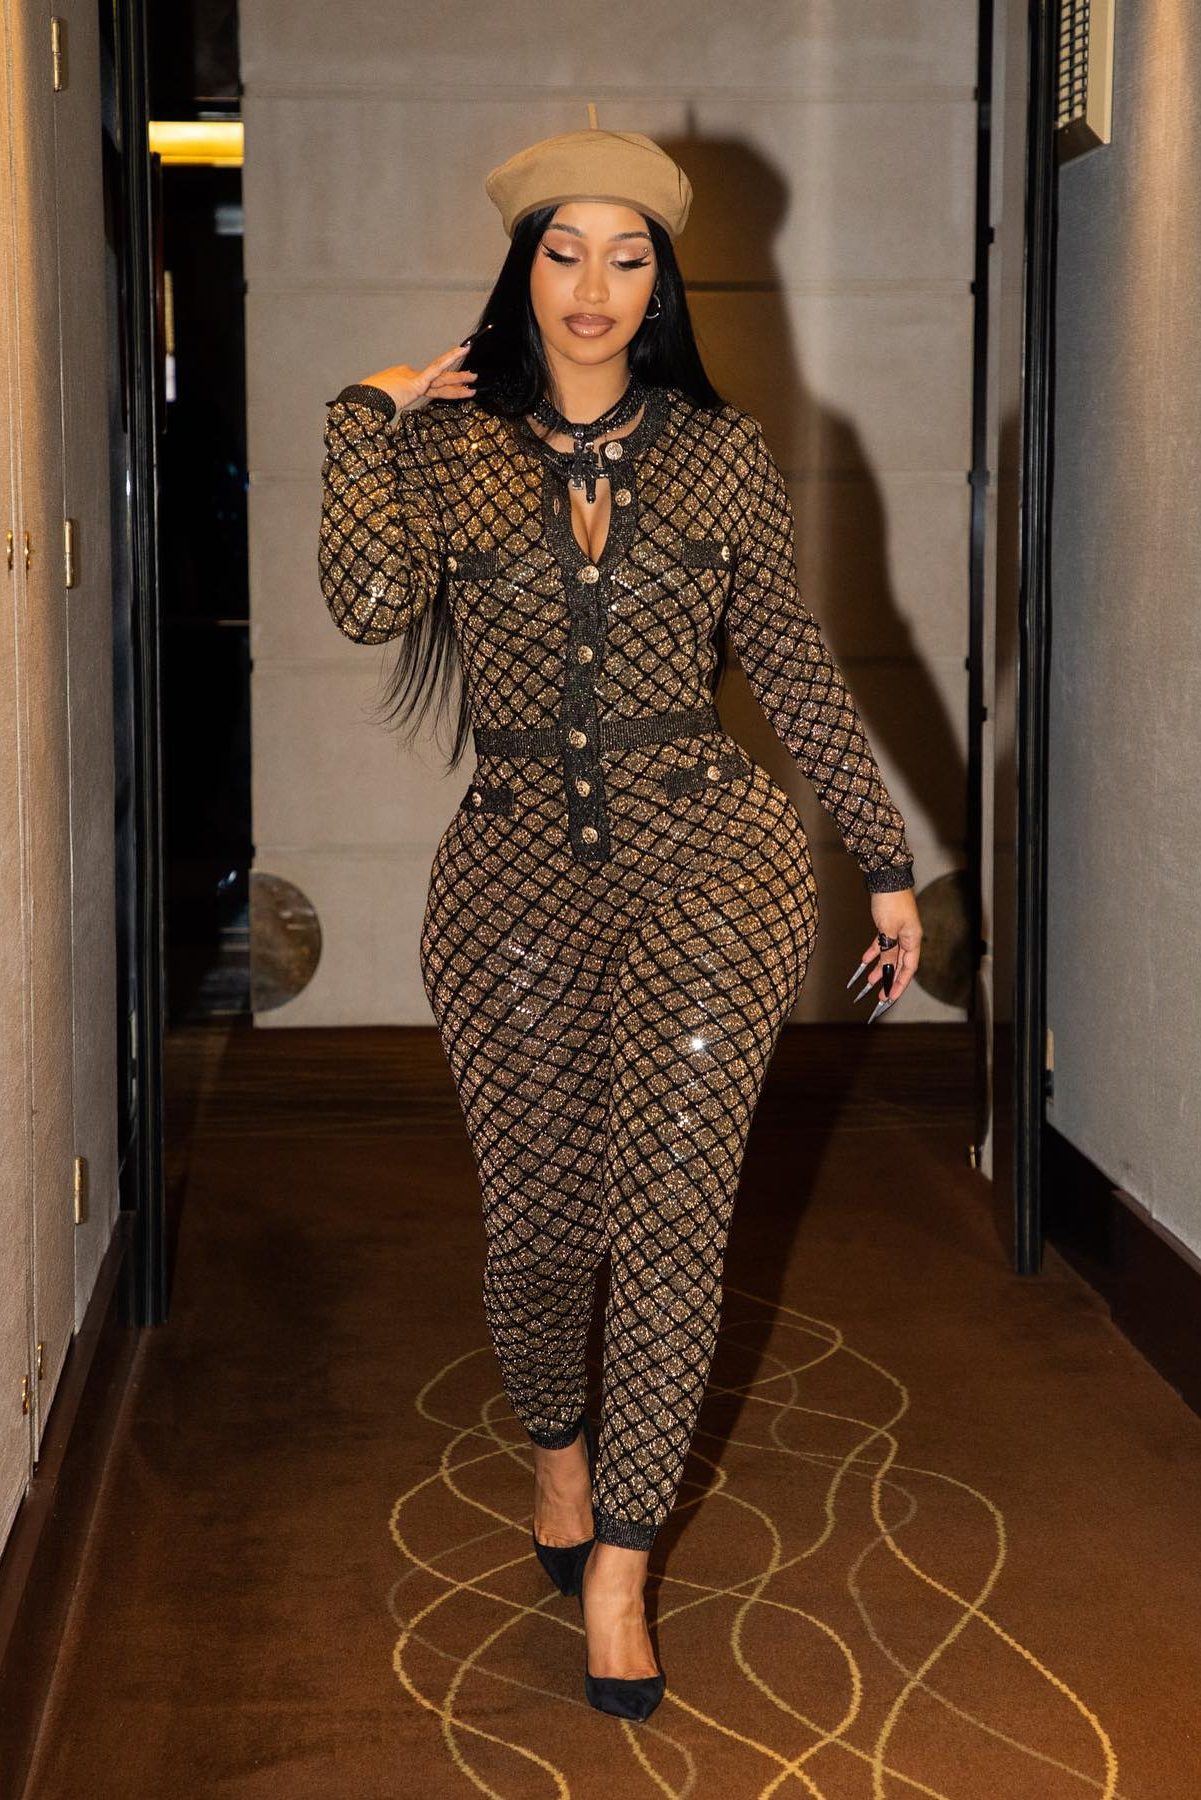 Cardi B's Best Outfits of 2021: From Surrealist to Fearless